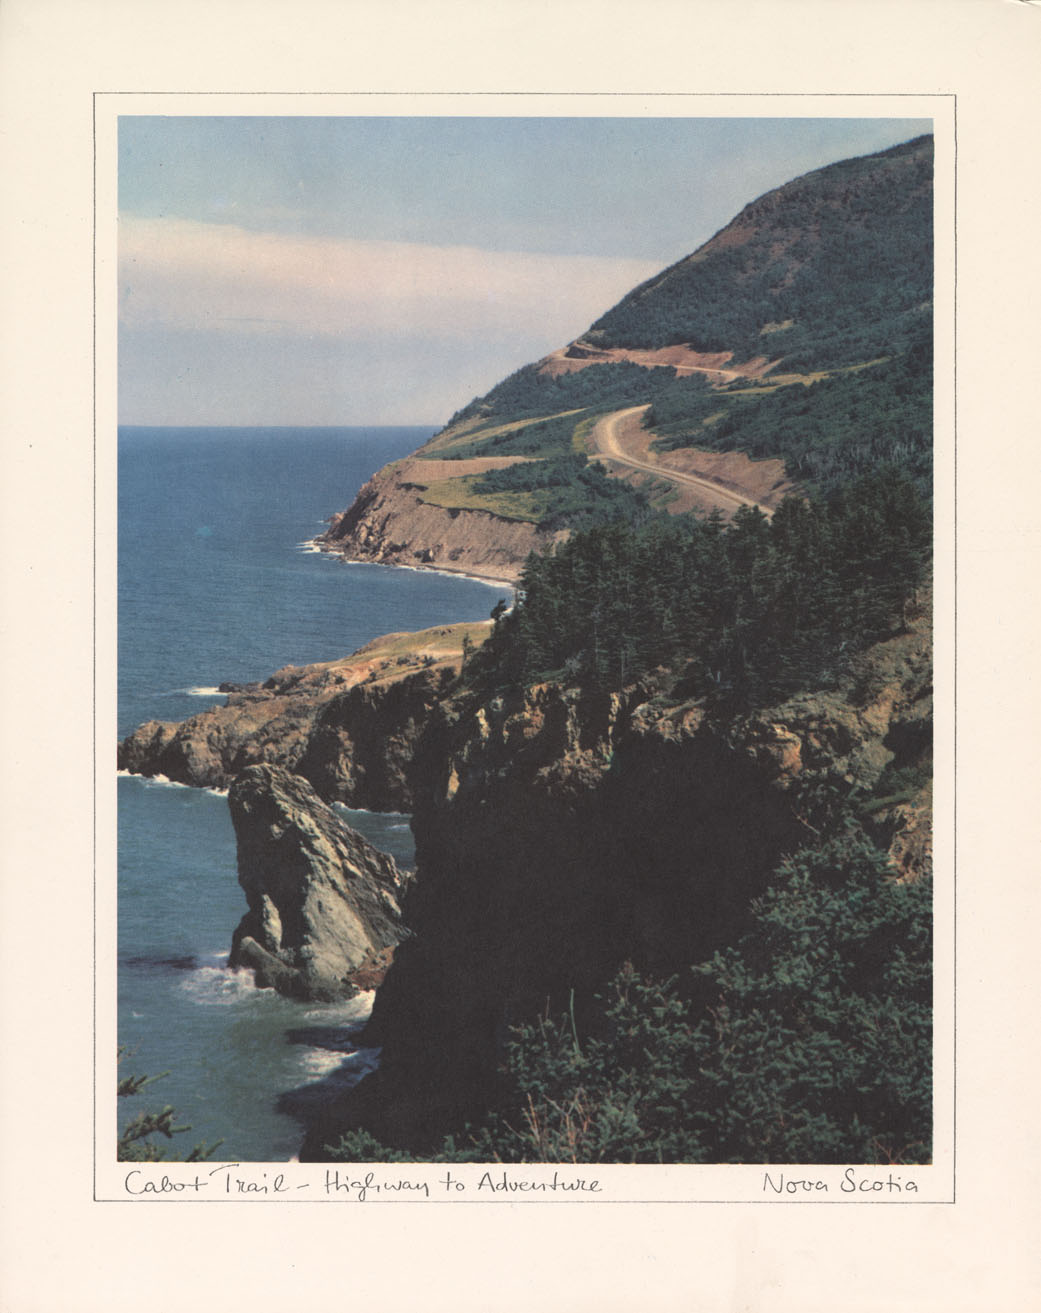 Book Jackets, Advertisements, and Art Reproductions: Atlantic Pavillion Photos of NS (from expo '67): Cabot Trail - Highway to Adventure